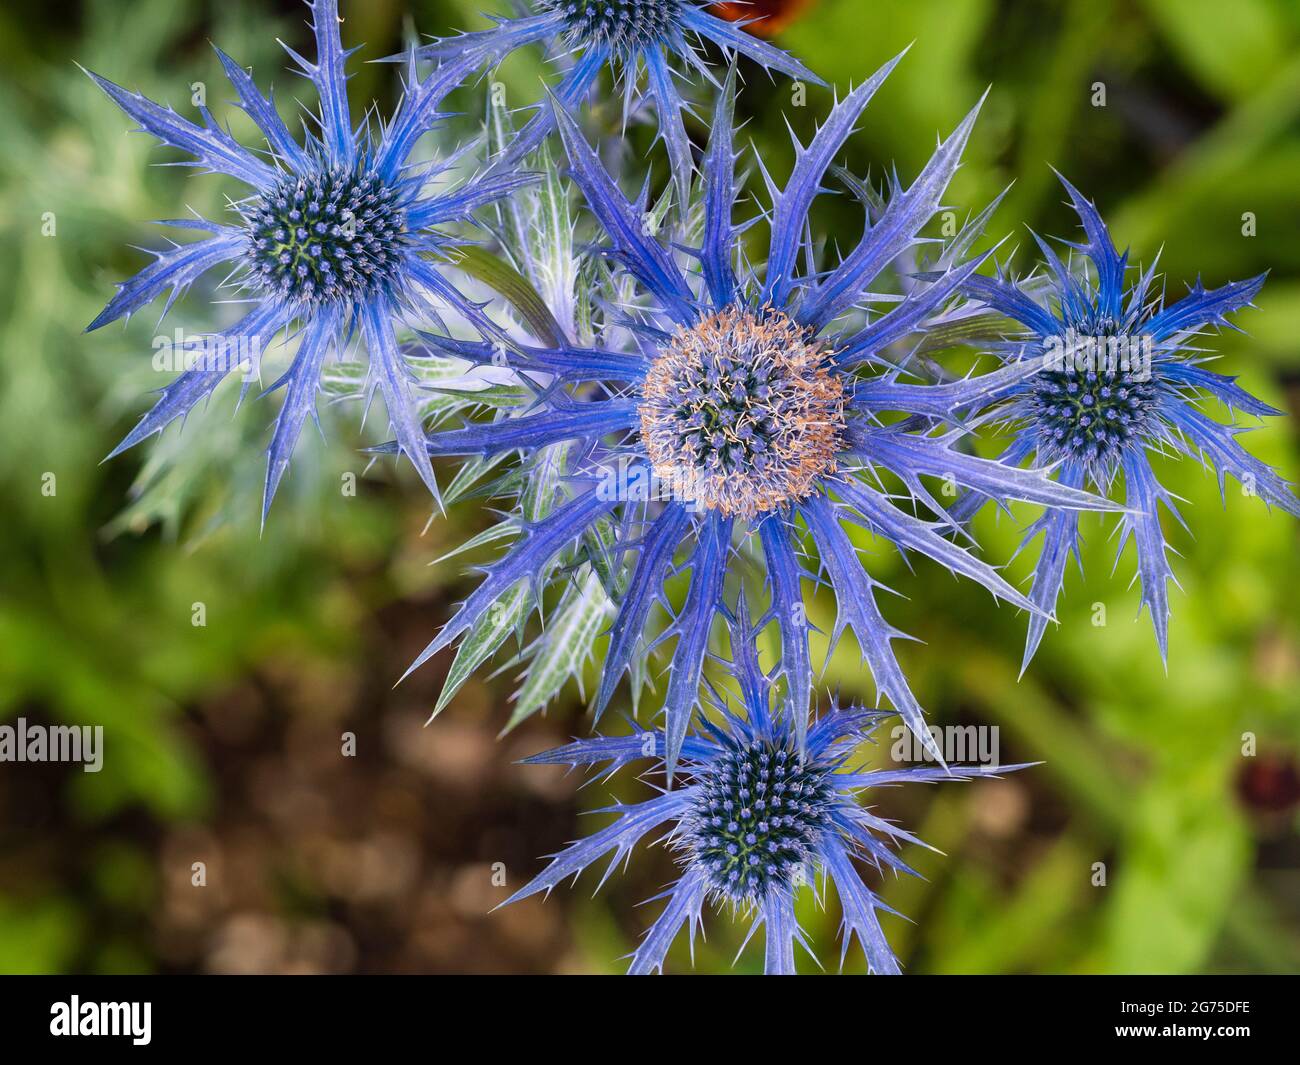 Overhead view of the mid summer blue violet flowers of the spiky herbaceous perennial sea holly, Eryngium x zabelii 'Big Blue' Stock Photo